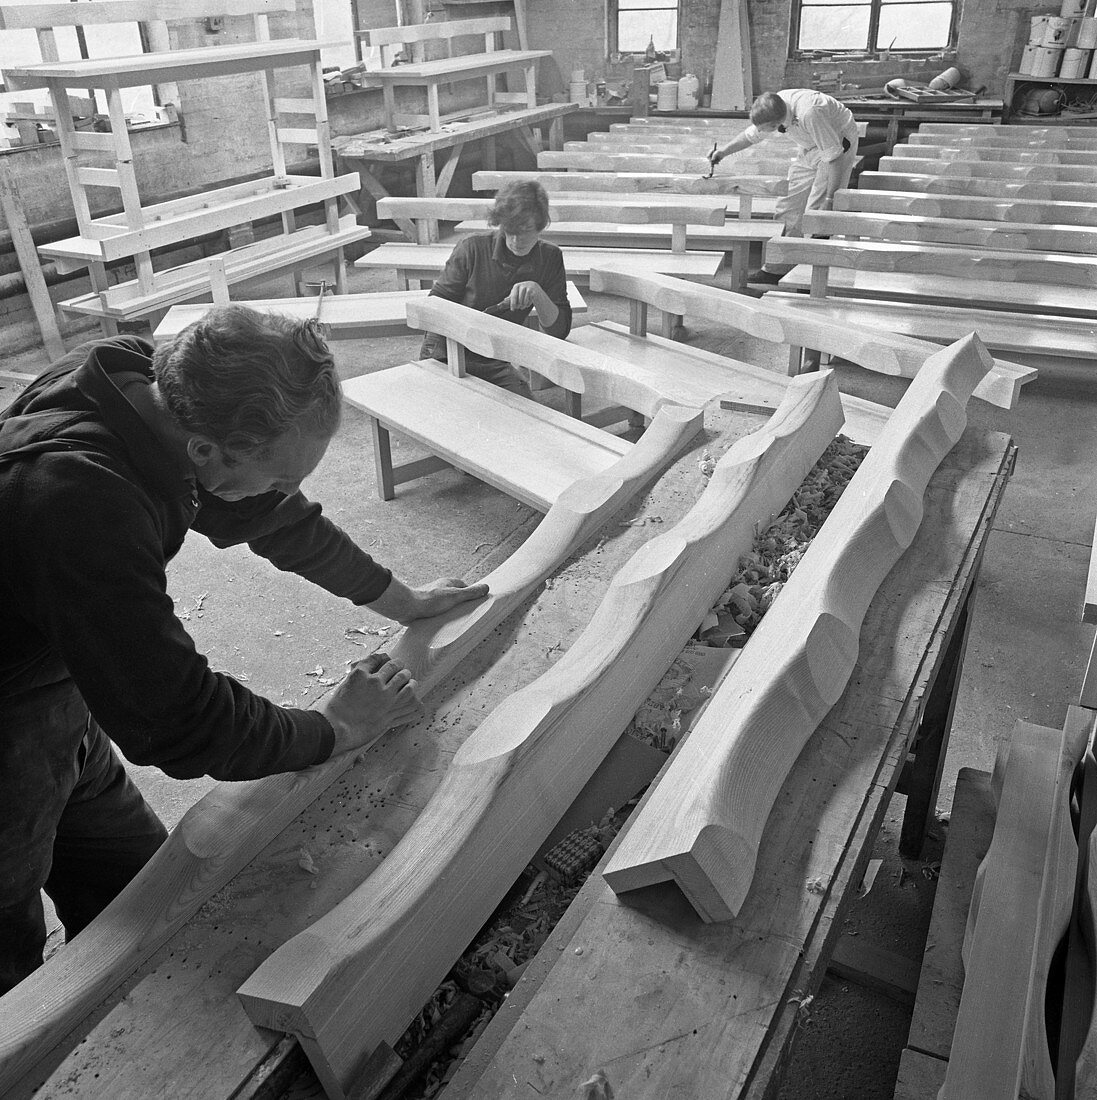 Carpenters working on church pews, 1969